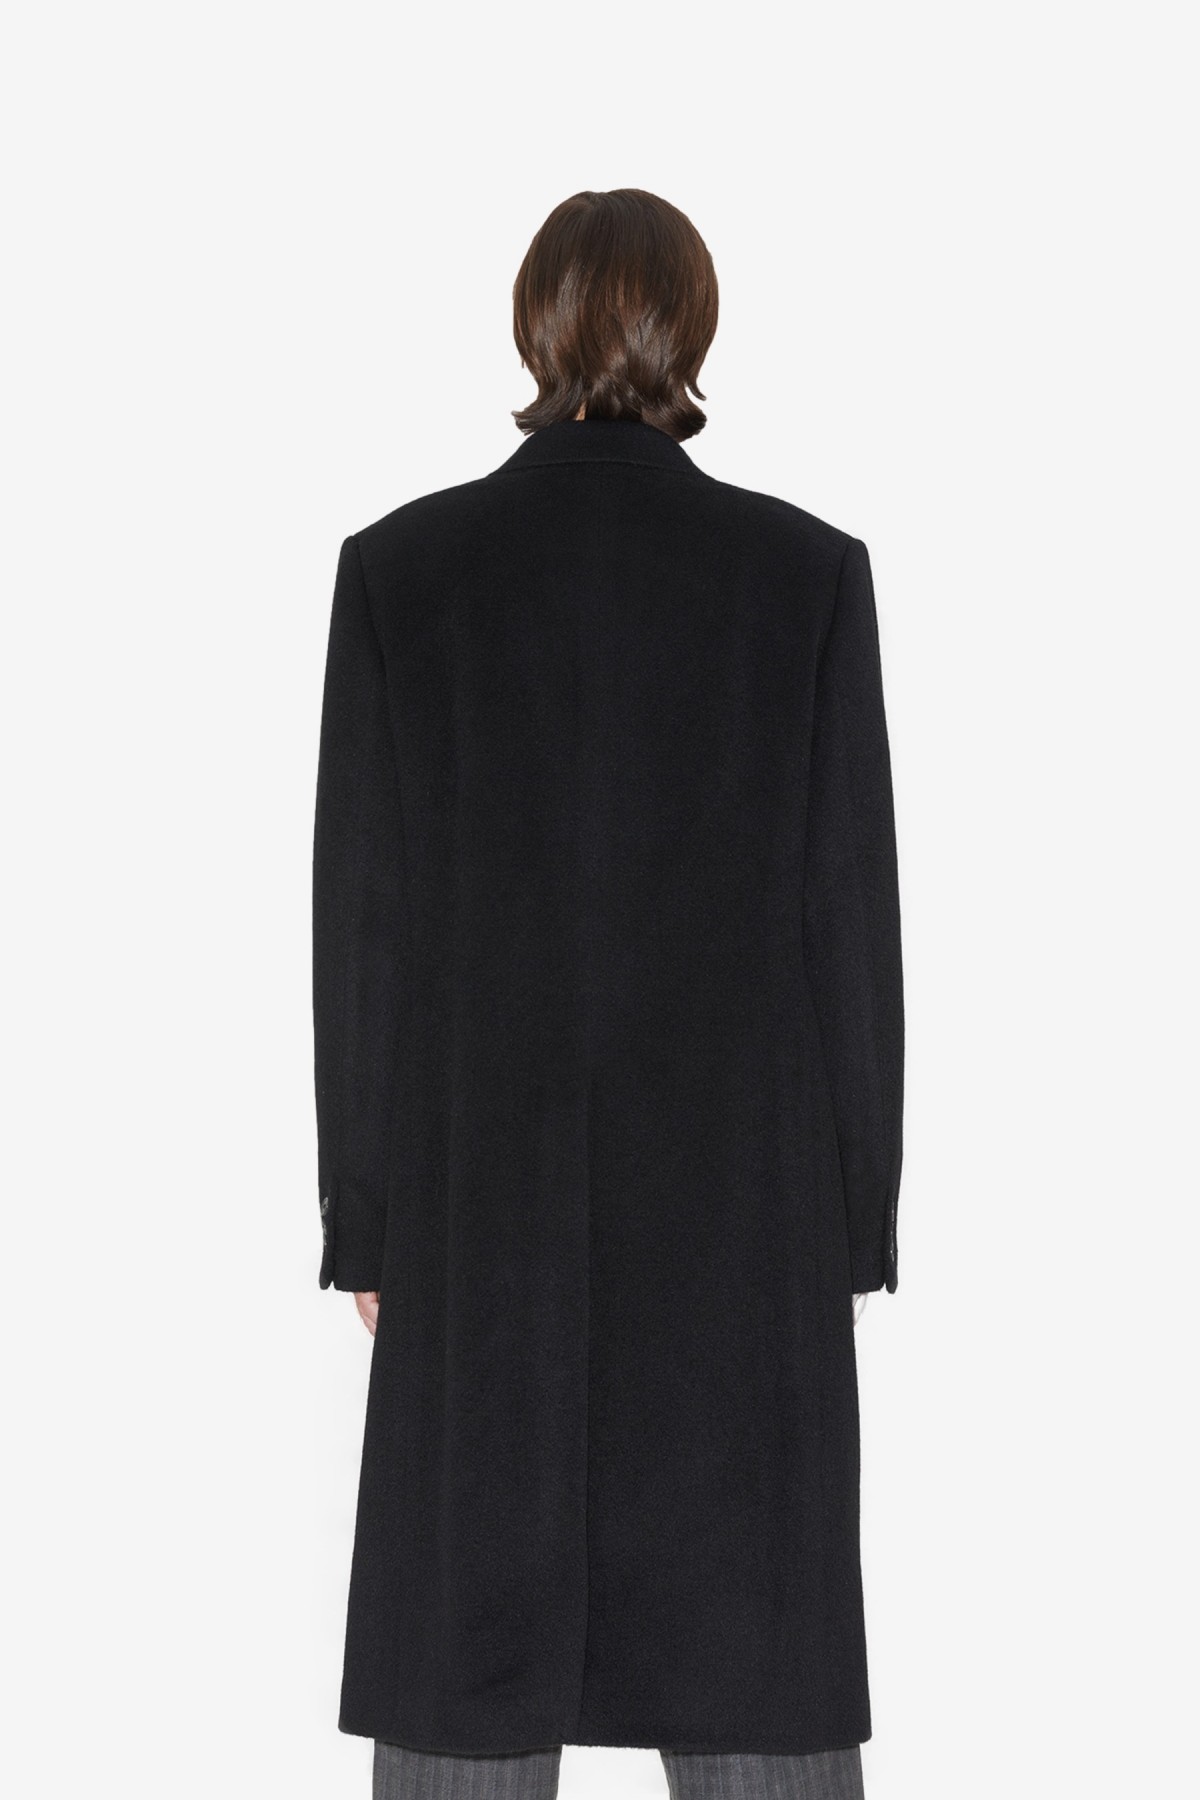 Our Legacy Whale Coat in Black Hairy Wool